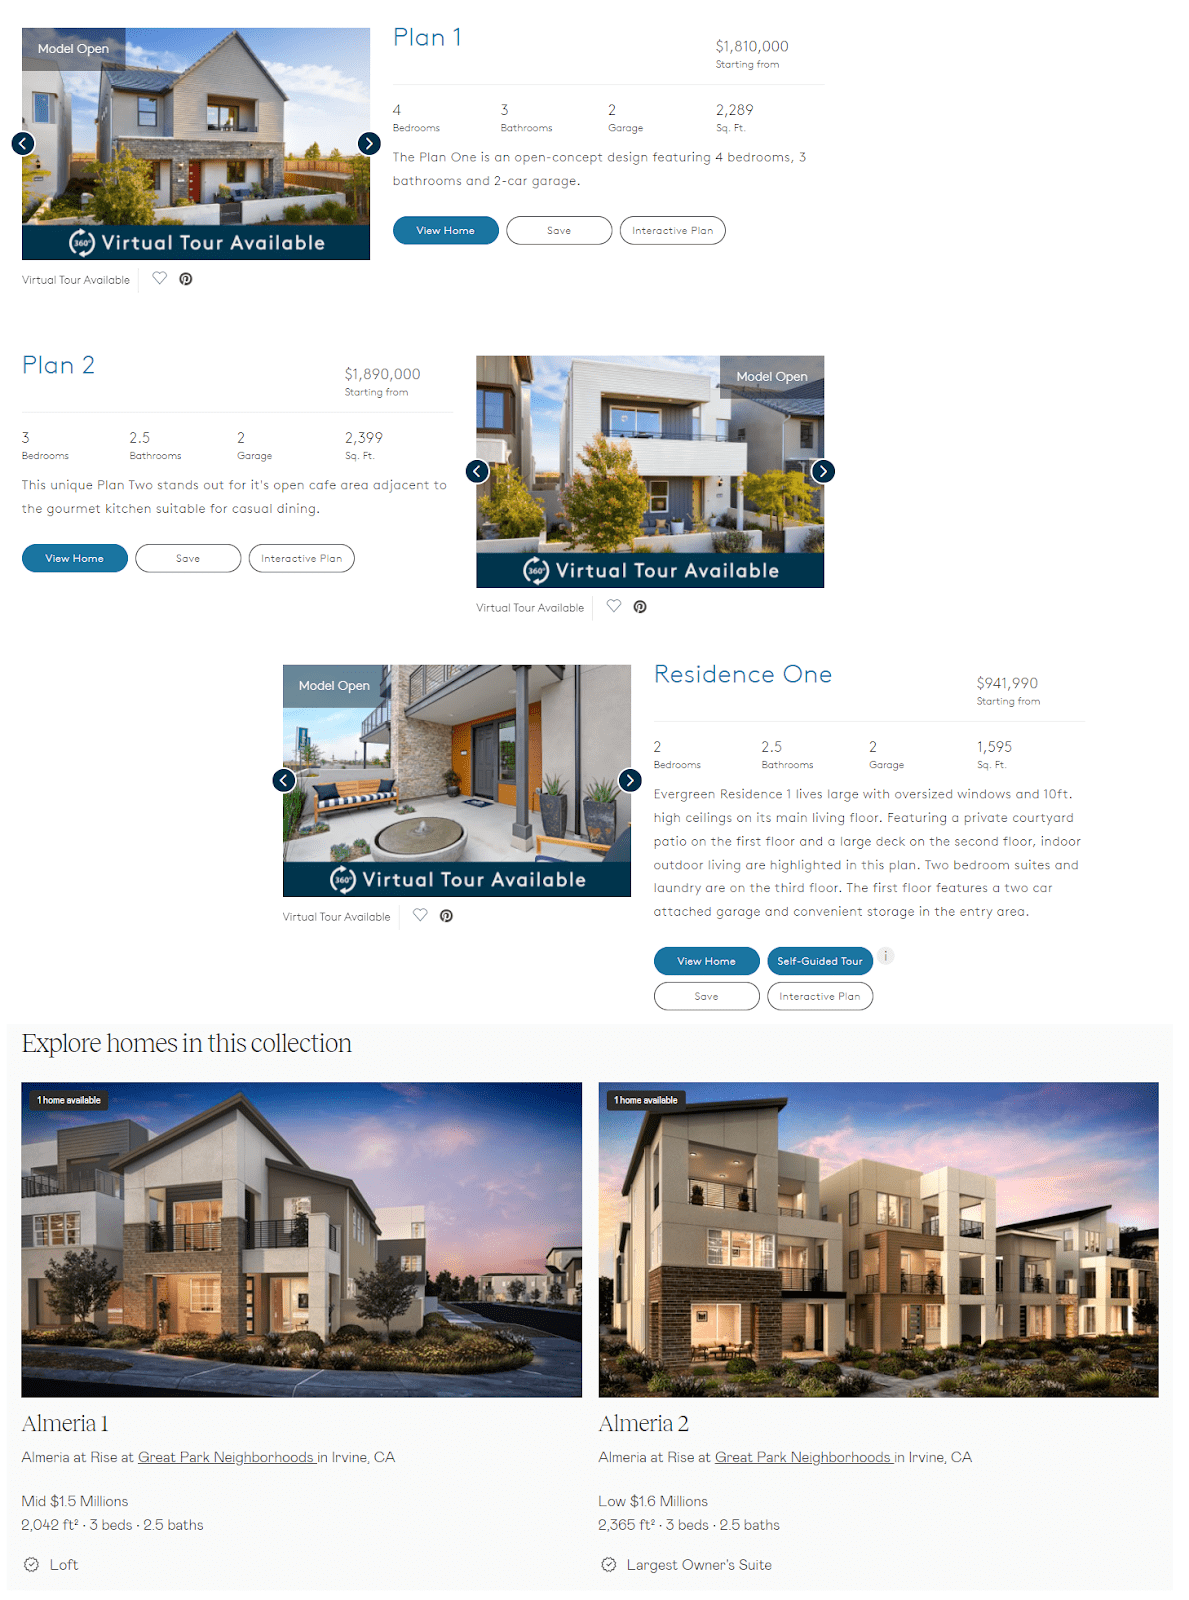 Images of some of the available properties.